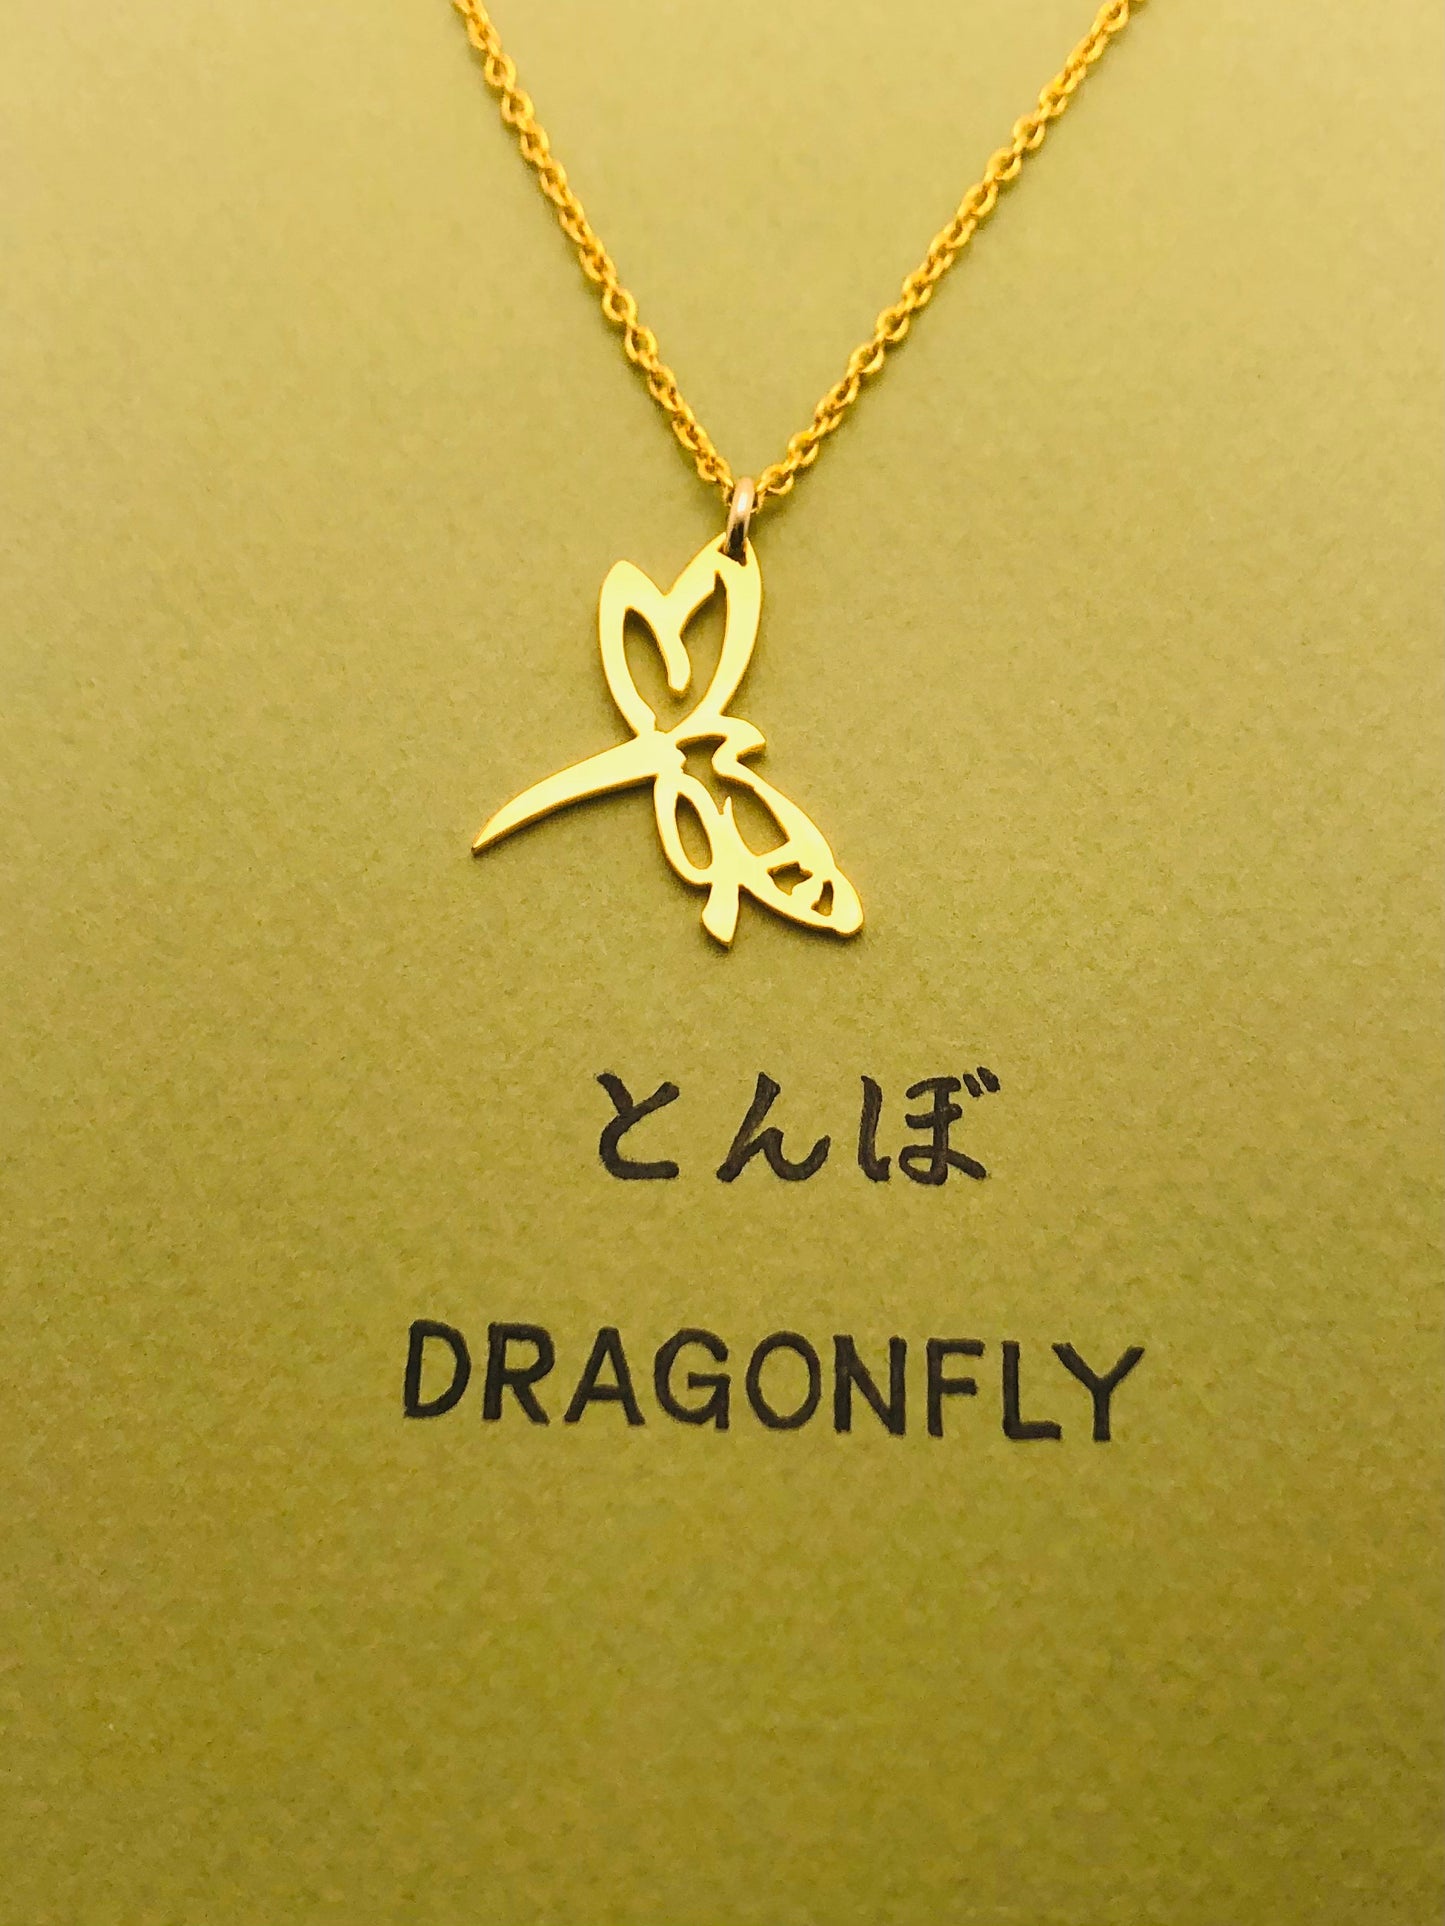 Dragonfly in Hiragana Necklace